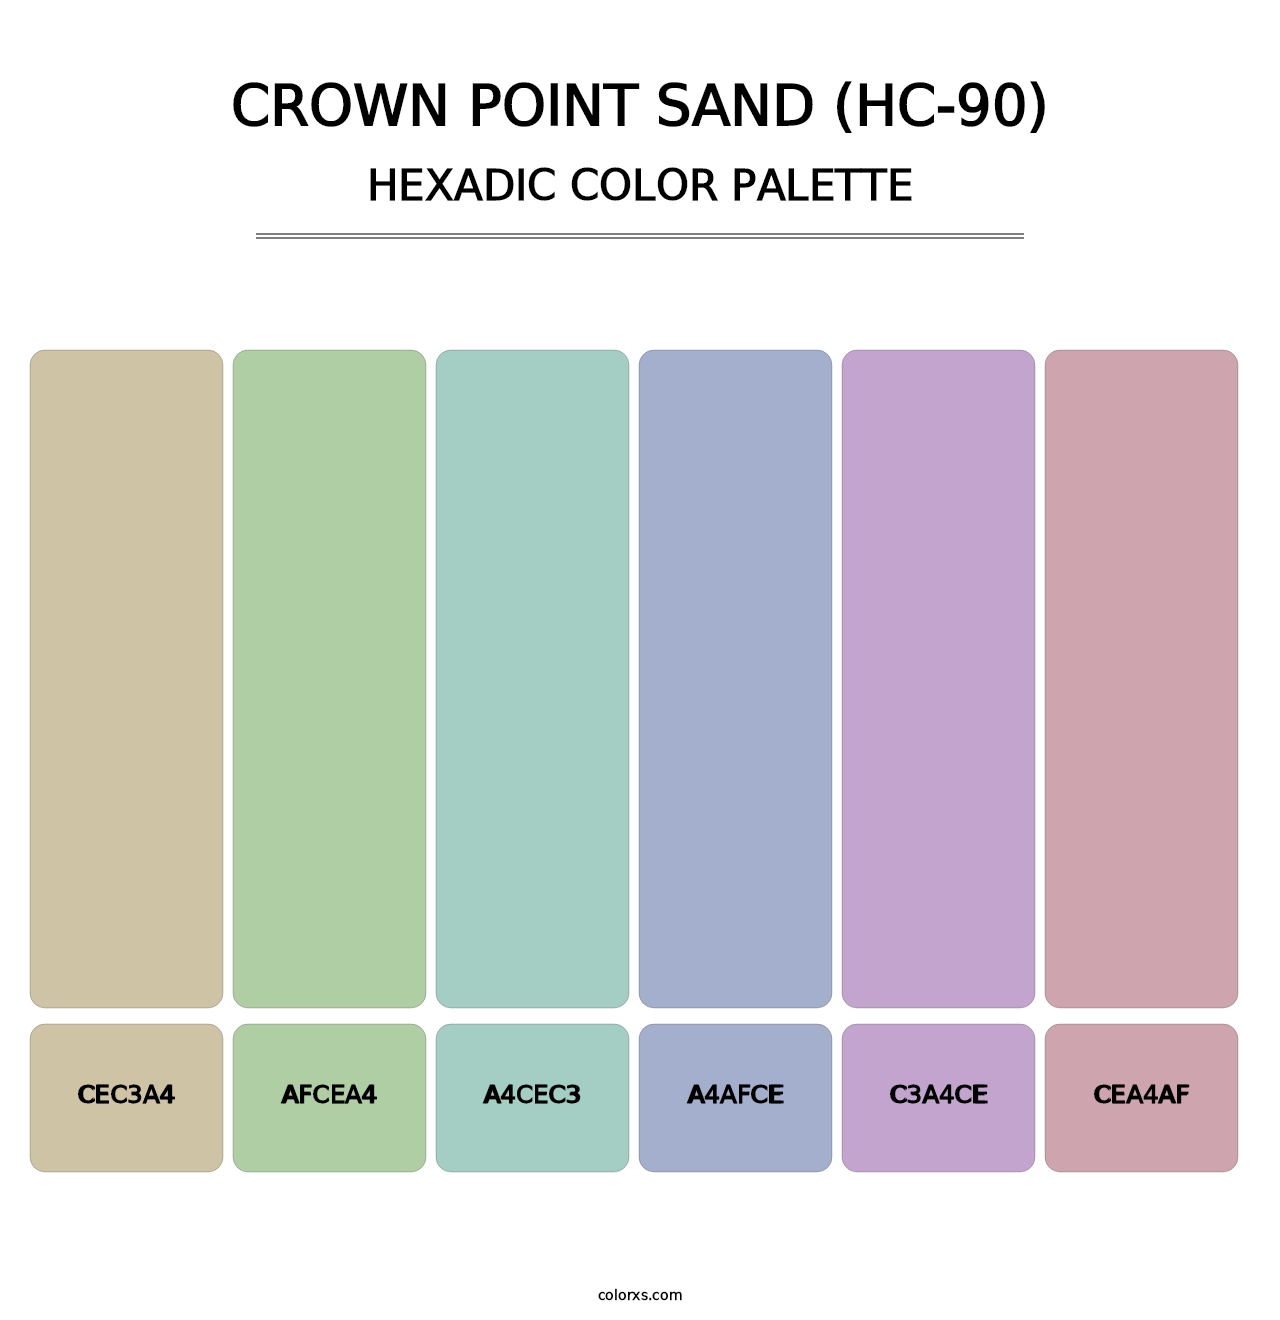 Crown Point Sand (HC-90) - Hexadic Color Palette